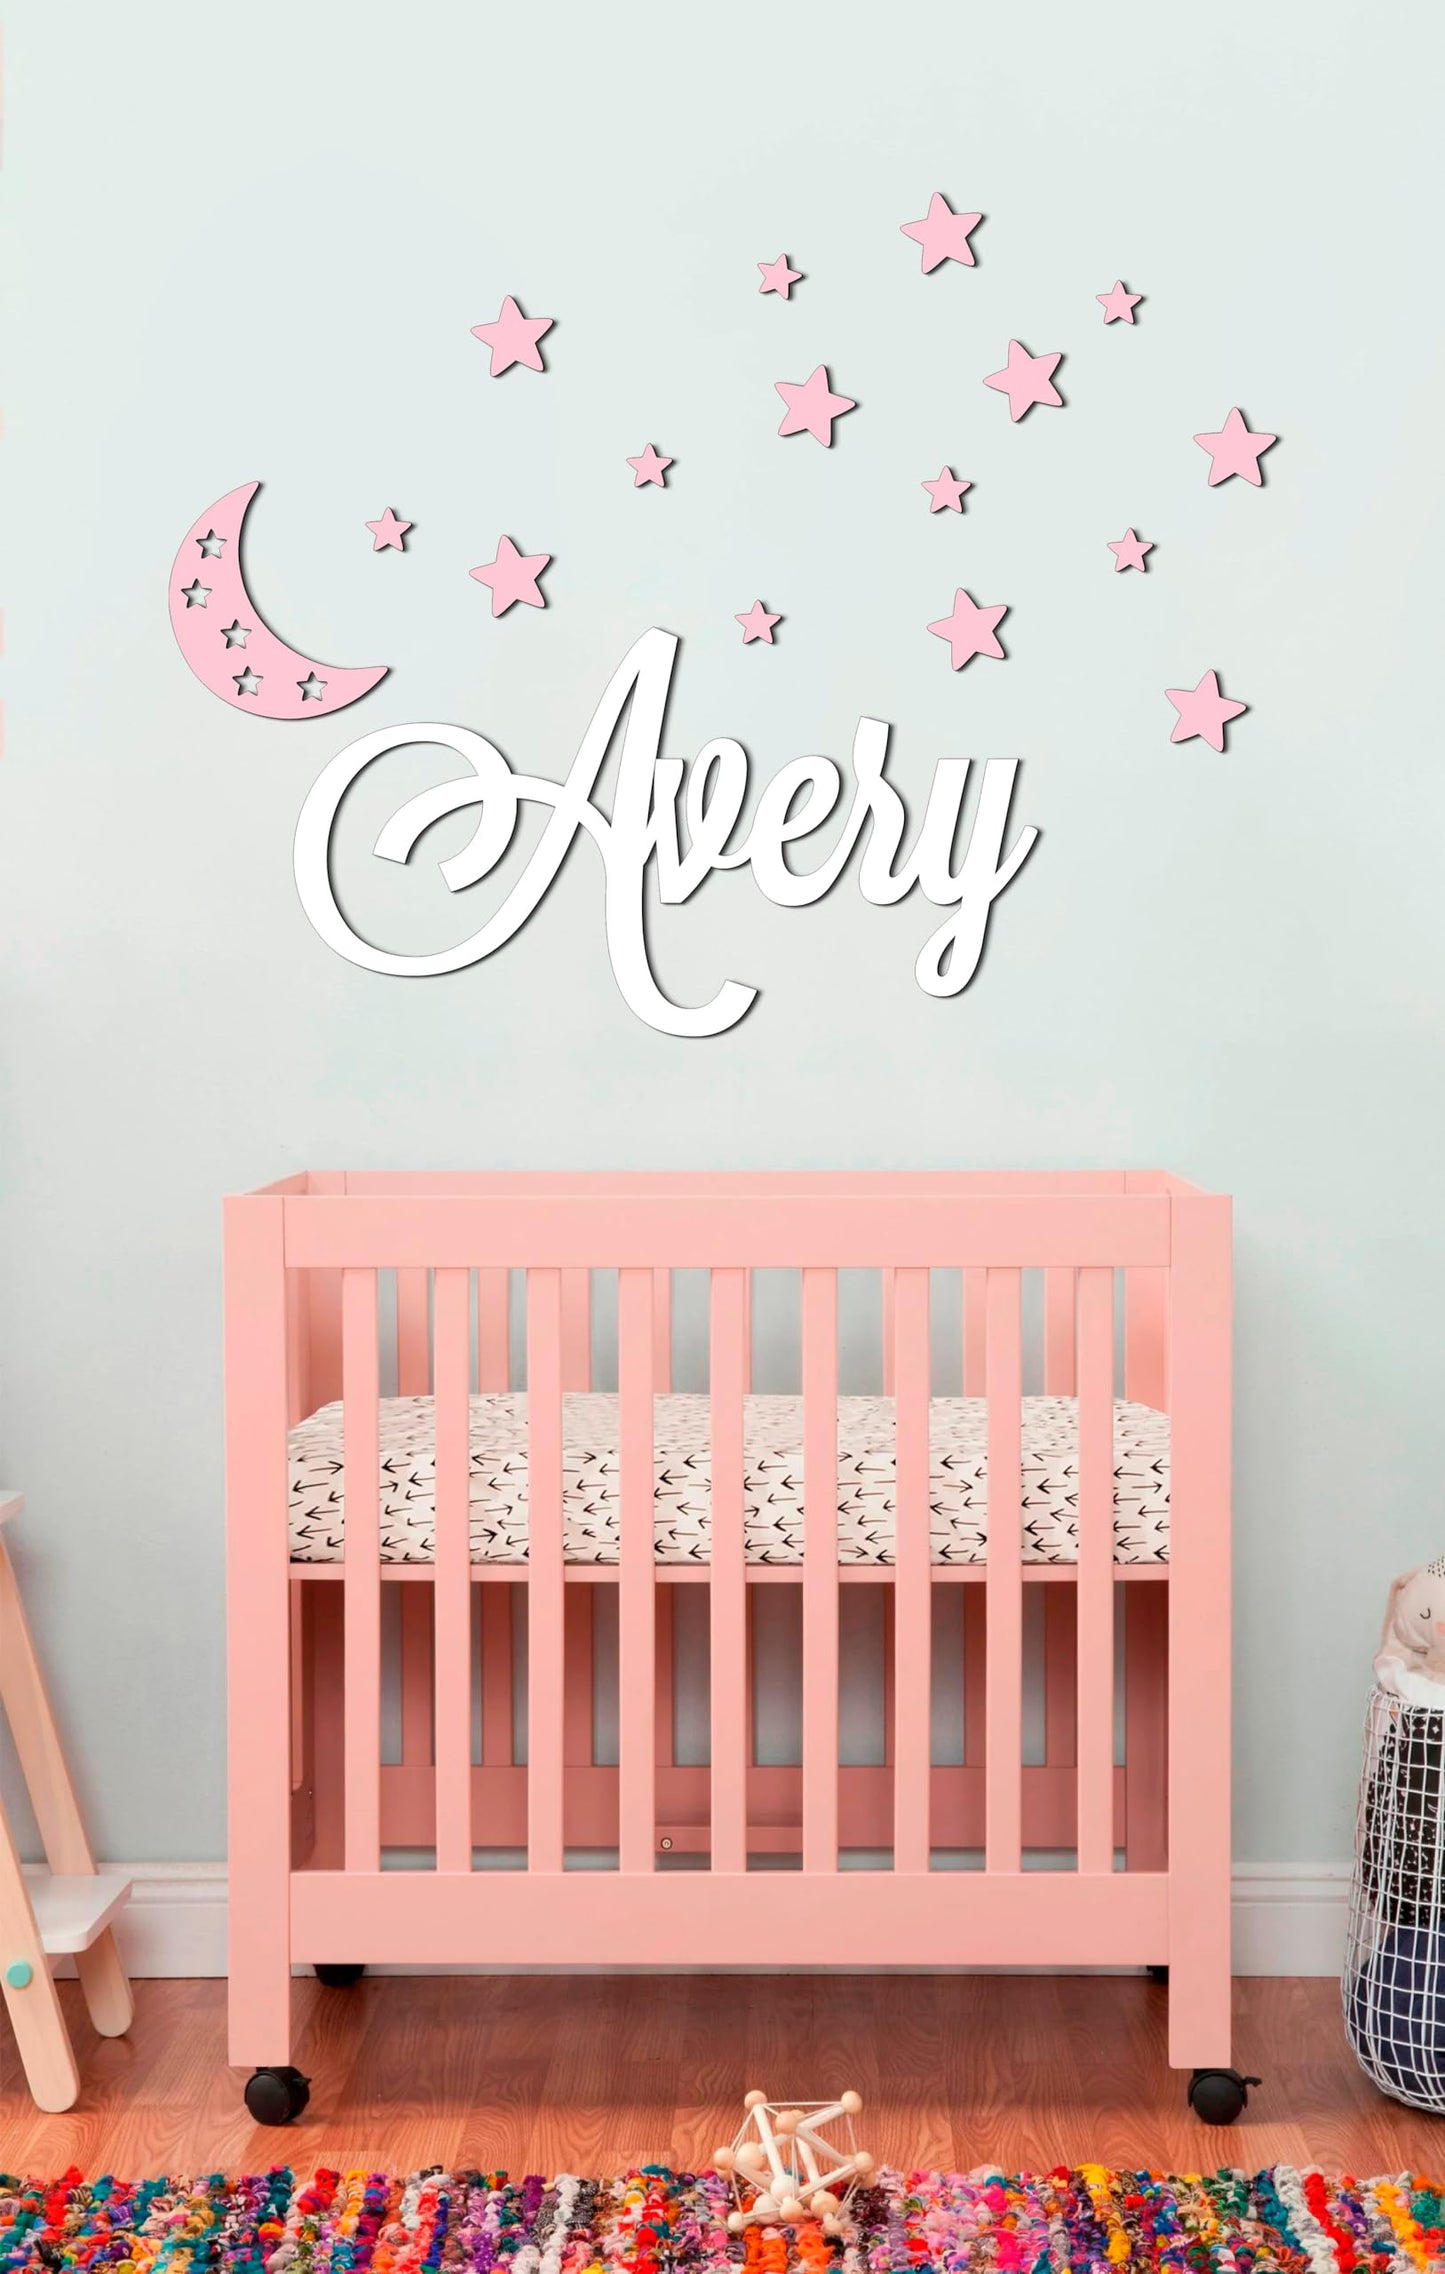 Personalized Custom Wood Name Sign with Stars Wooden Wall Stickers Nursery Name Sign, Personalized Baby Gifts Nursery Wall Decor Wooden Letters for